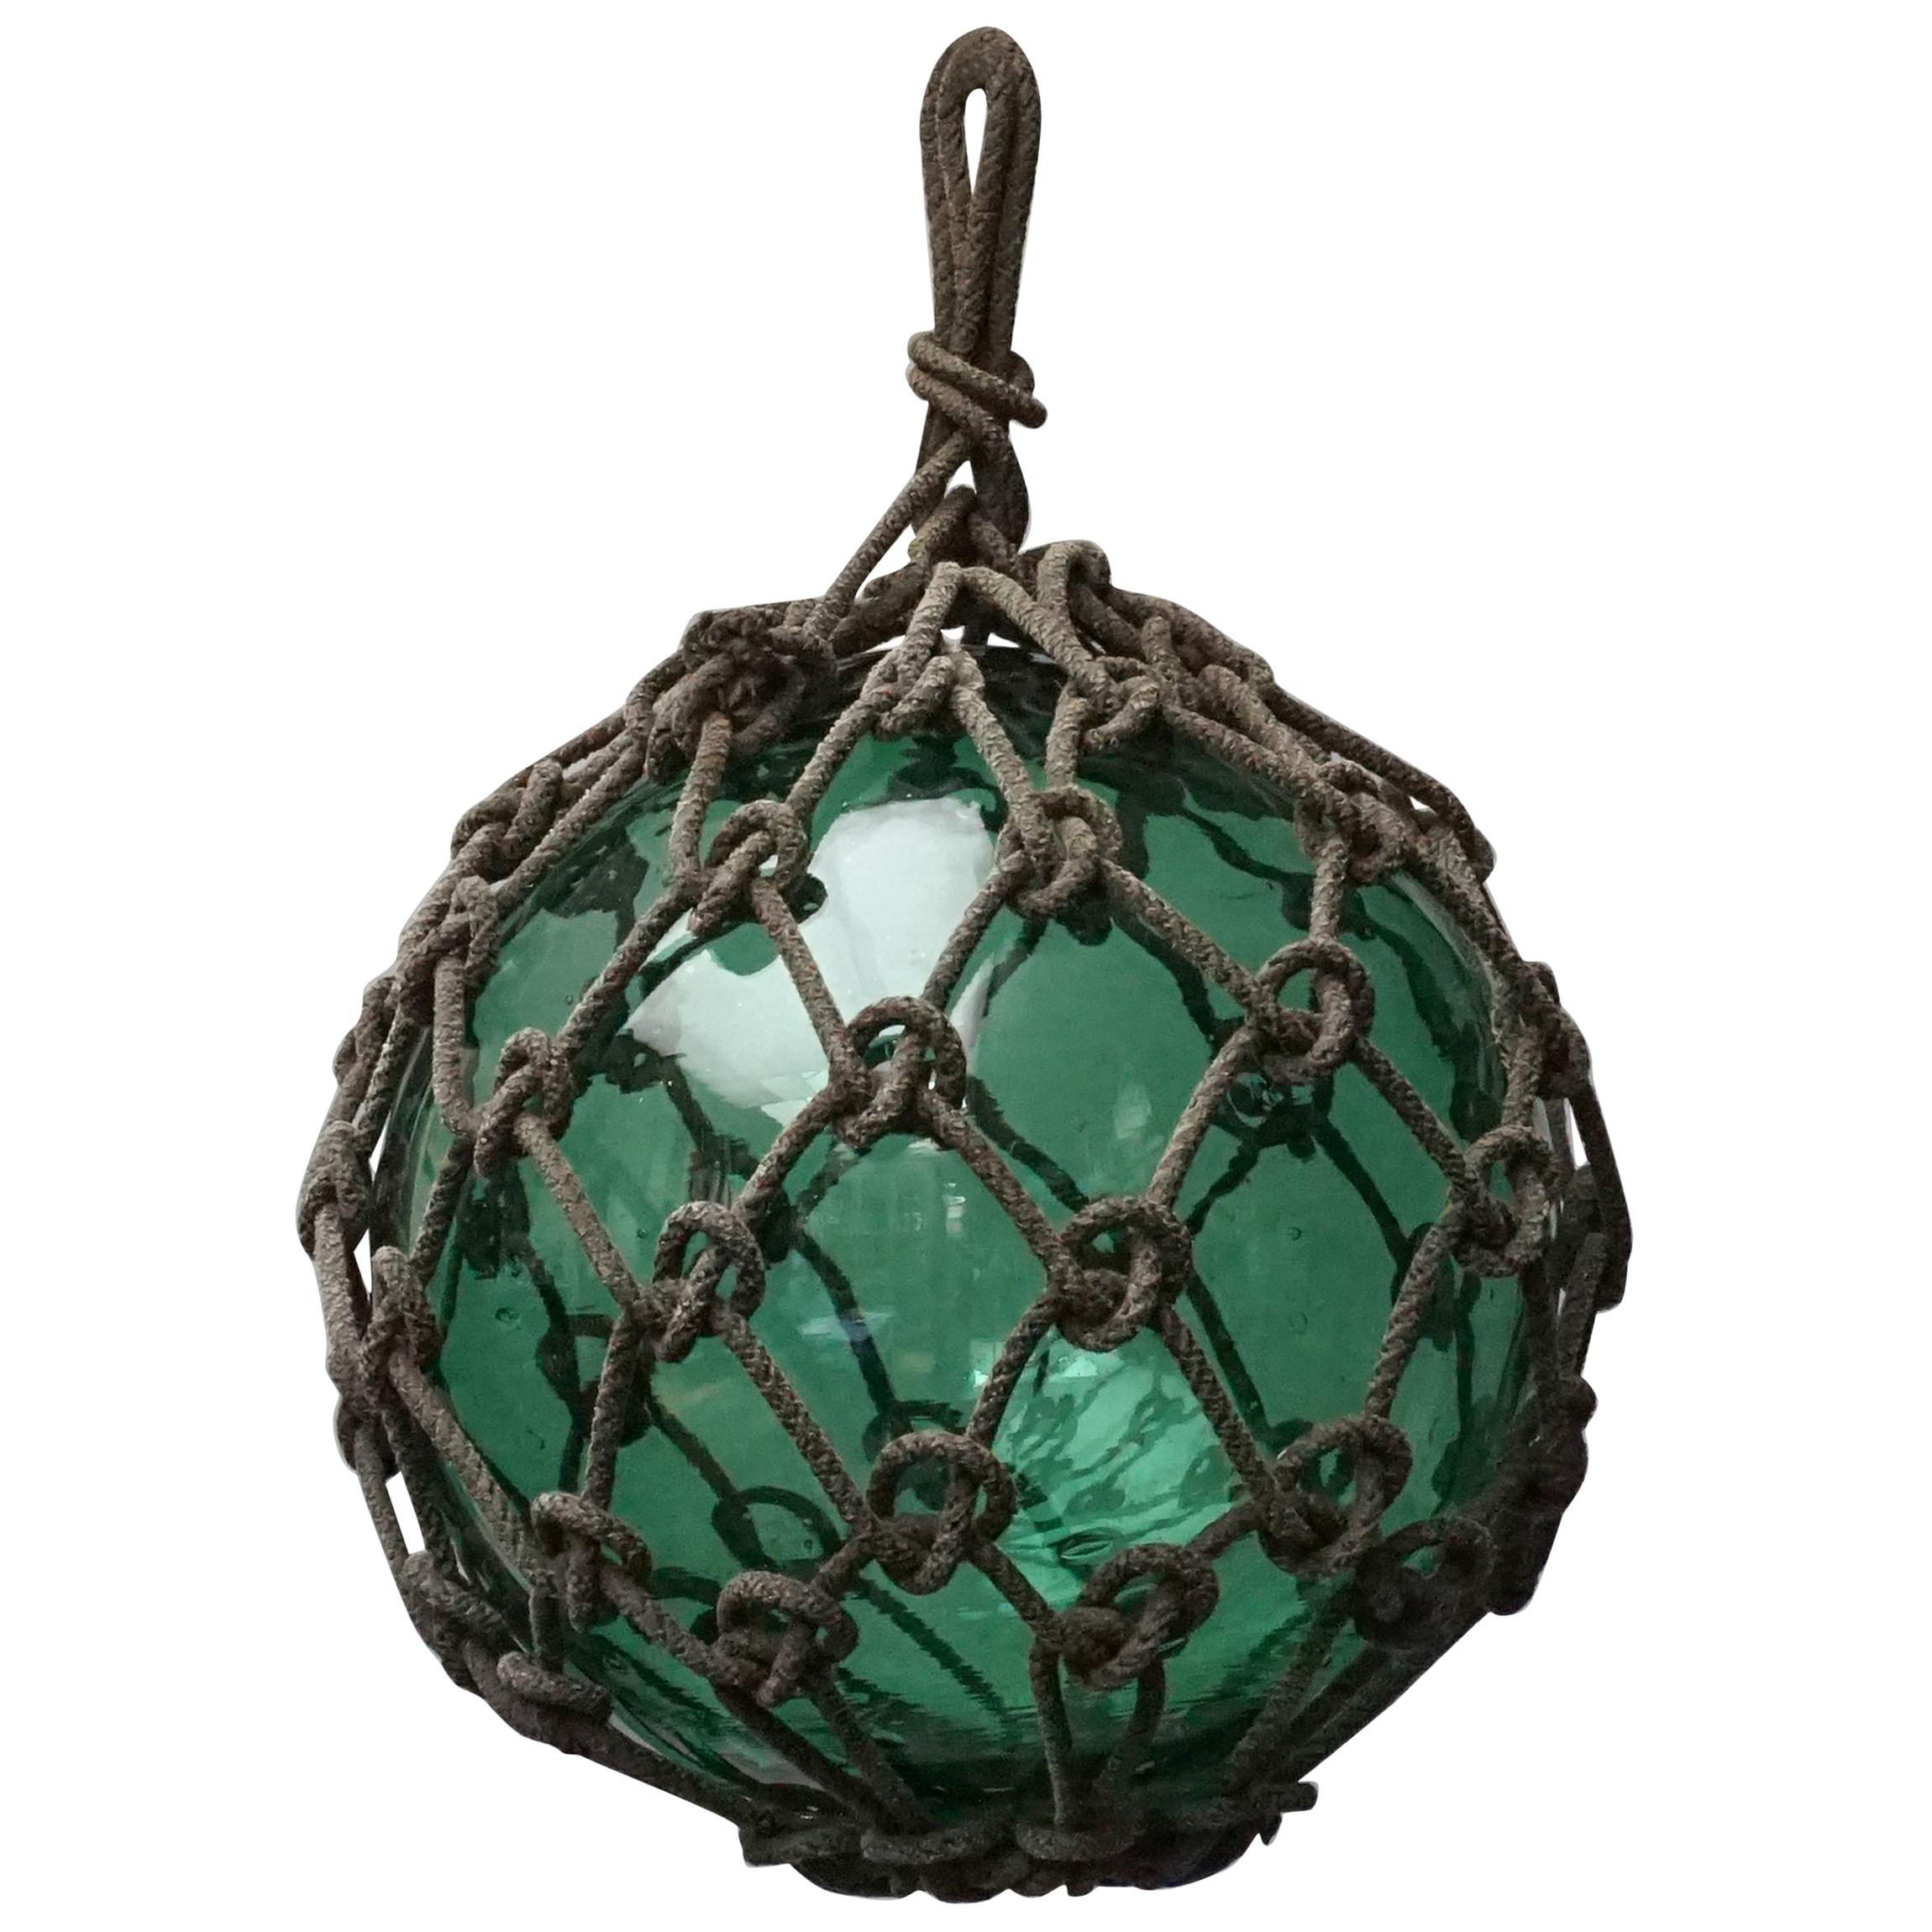 Early 20th Century Japanese Green Glass Fishing Float in Tied Knotted Ropes